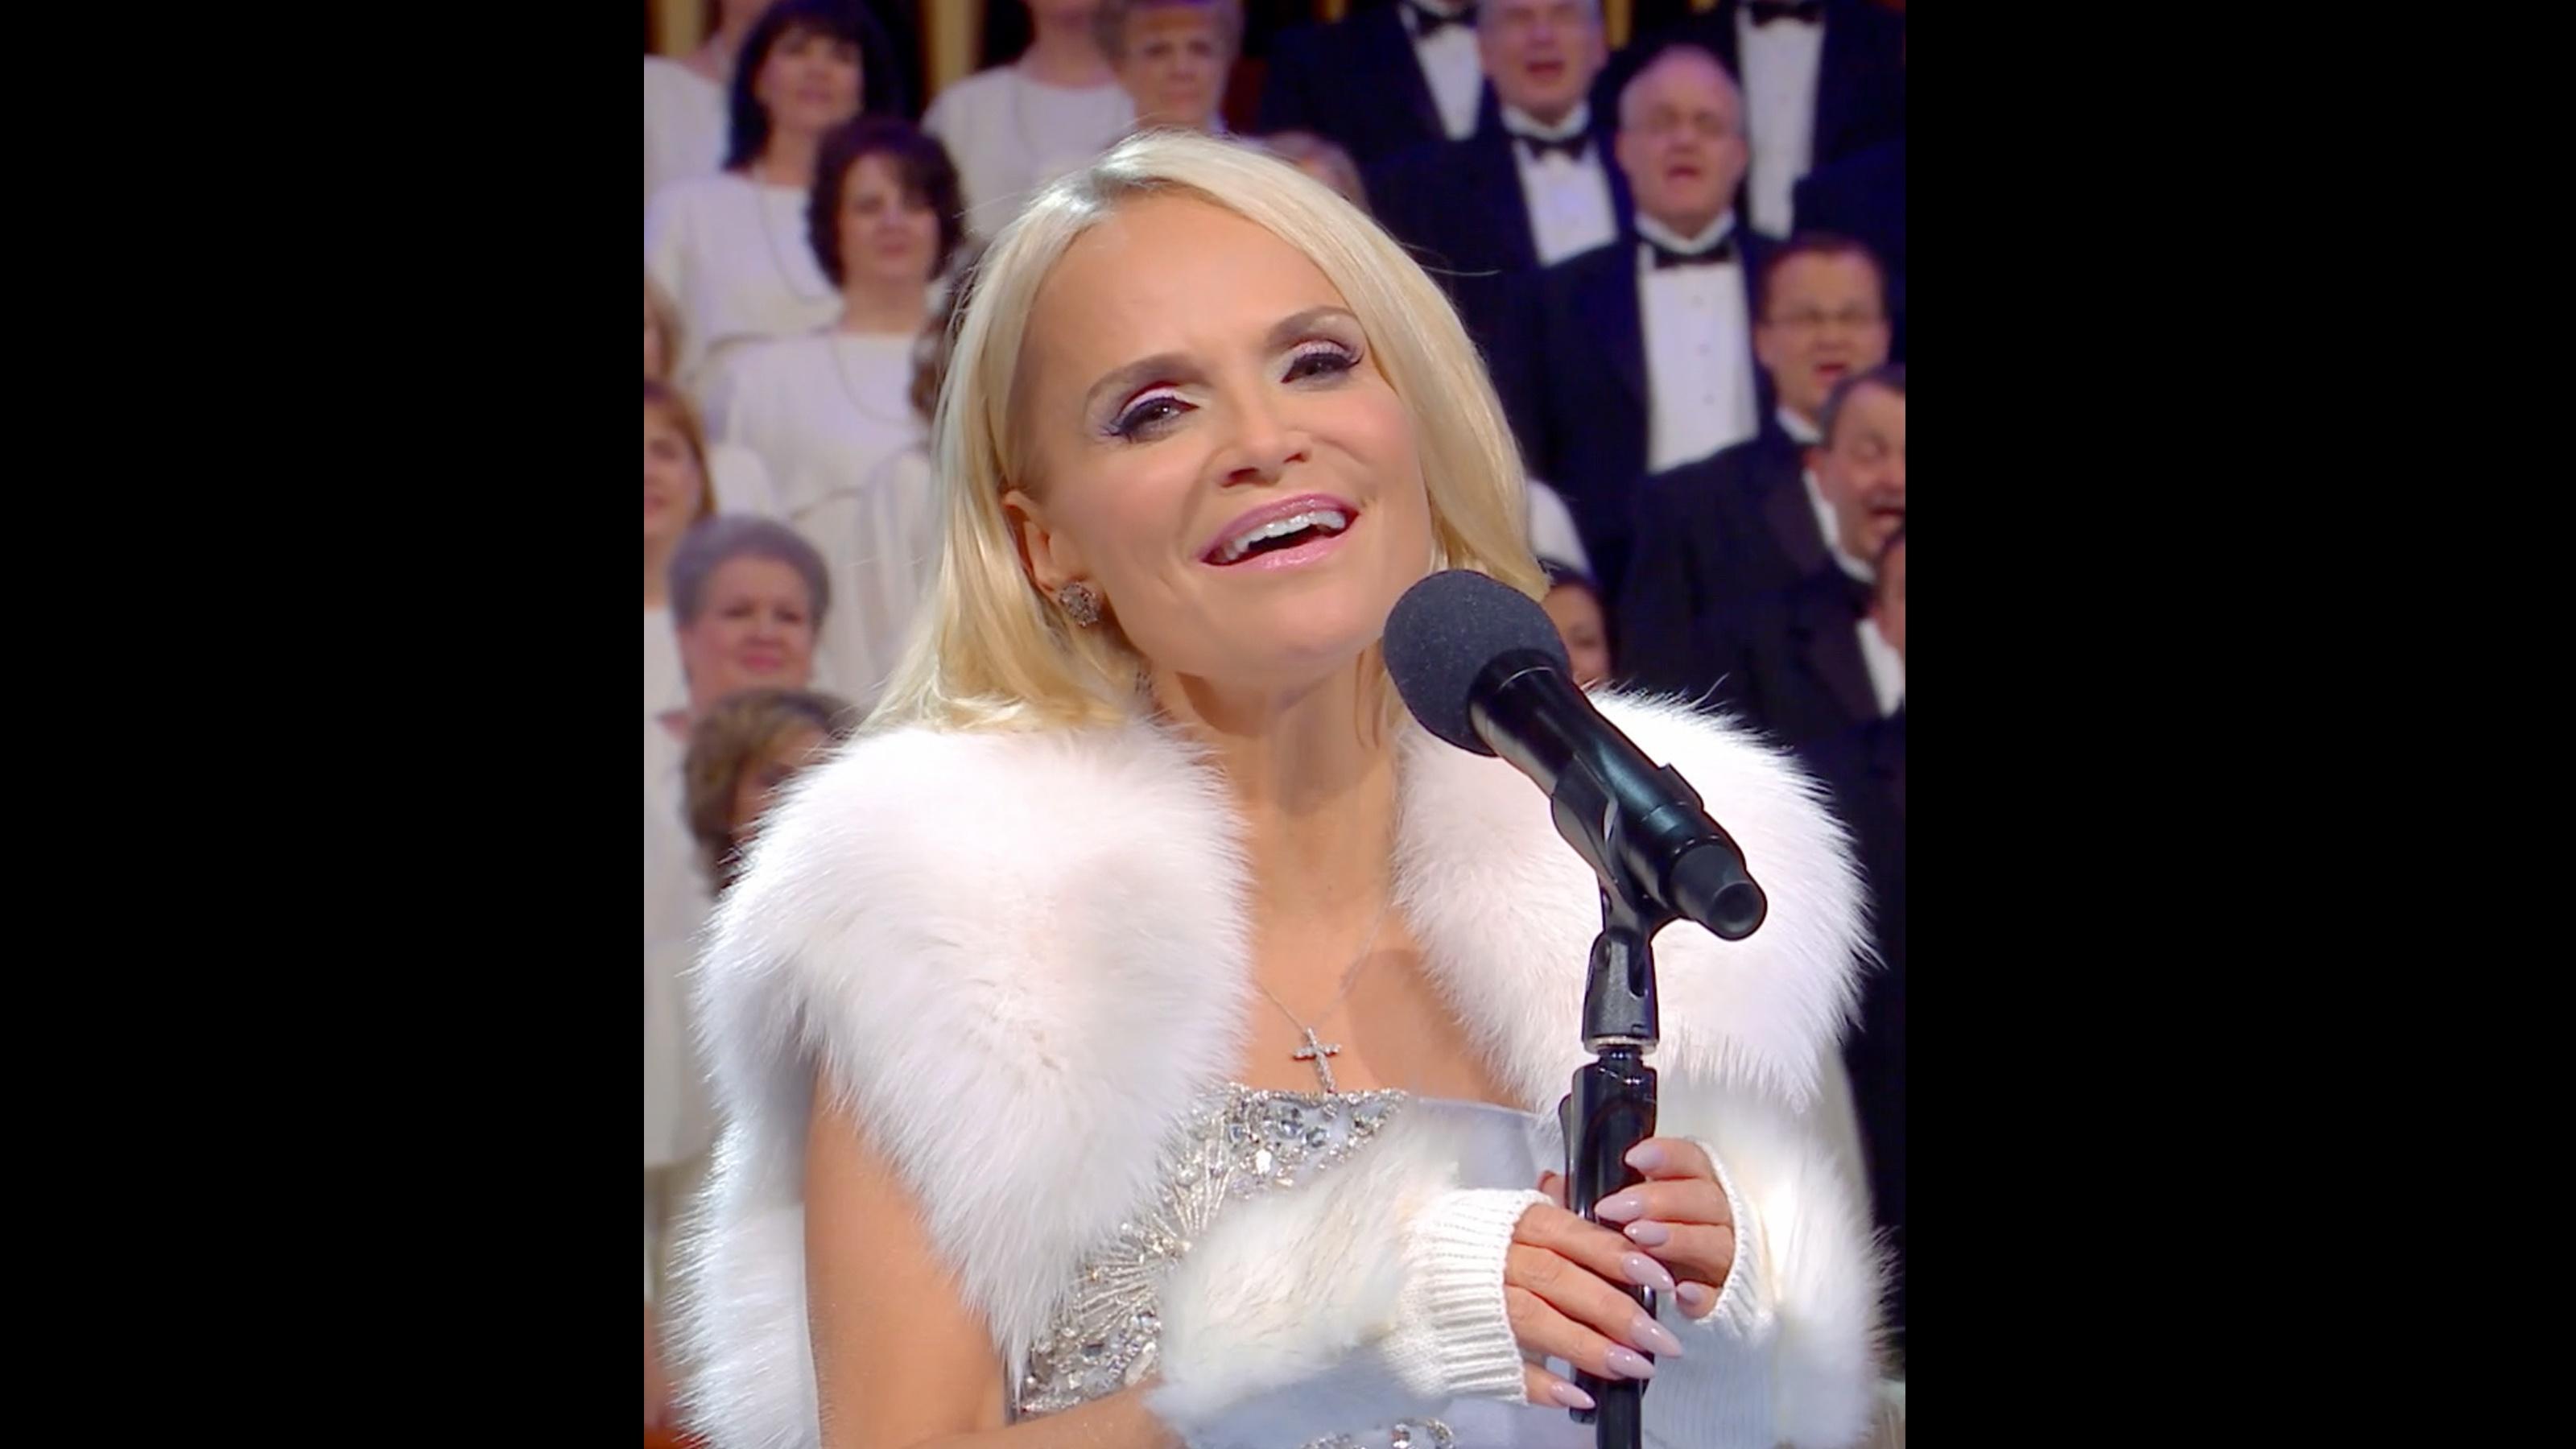 Kristin Chenoweth sings into a microphone on a stand while The Tabernacle Choir sings in the background.